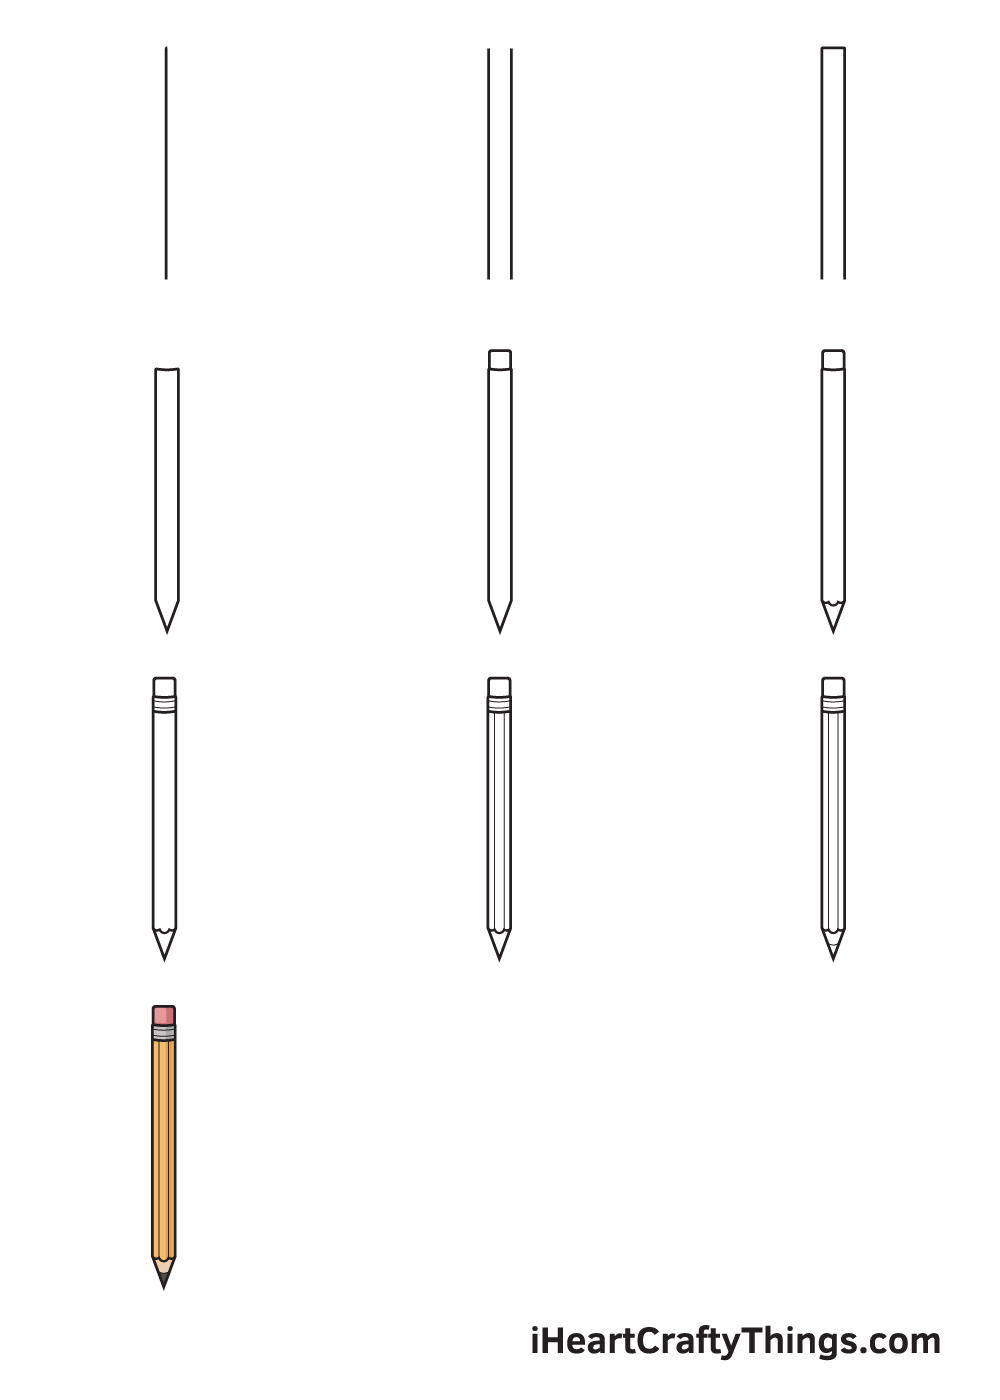 Drawing Pencil in 10 Easy Steps